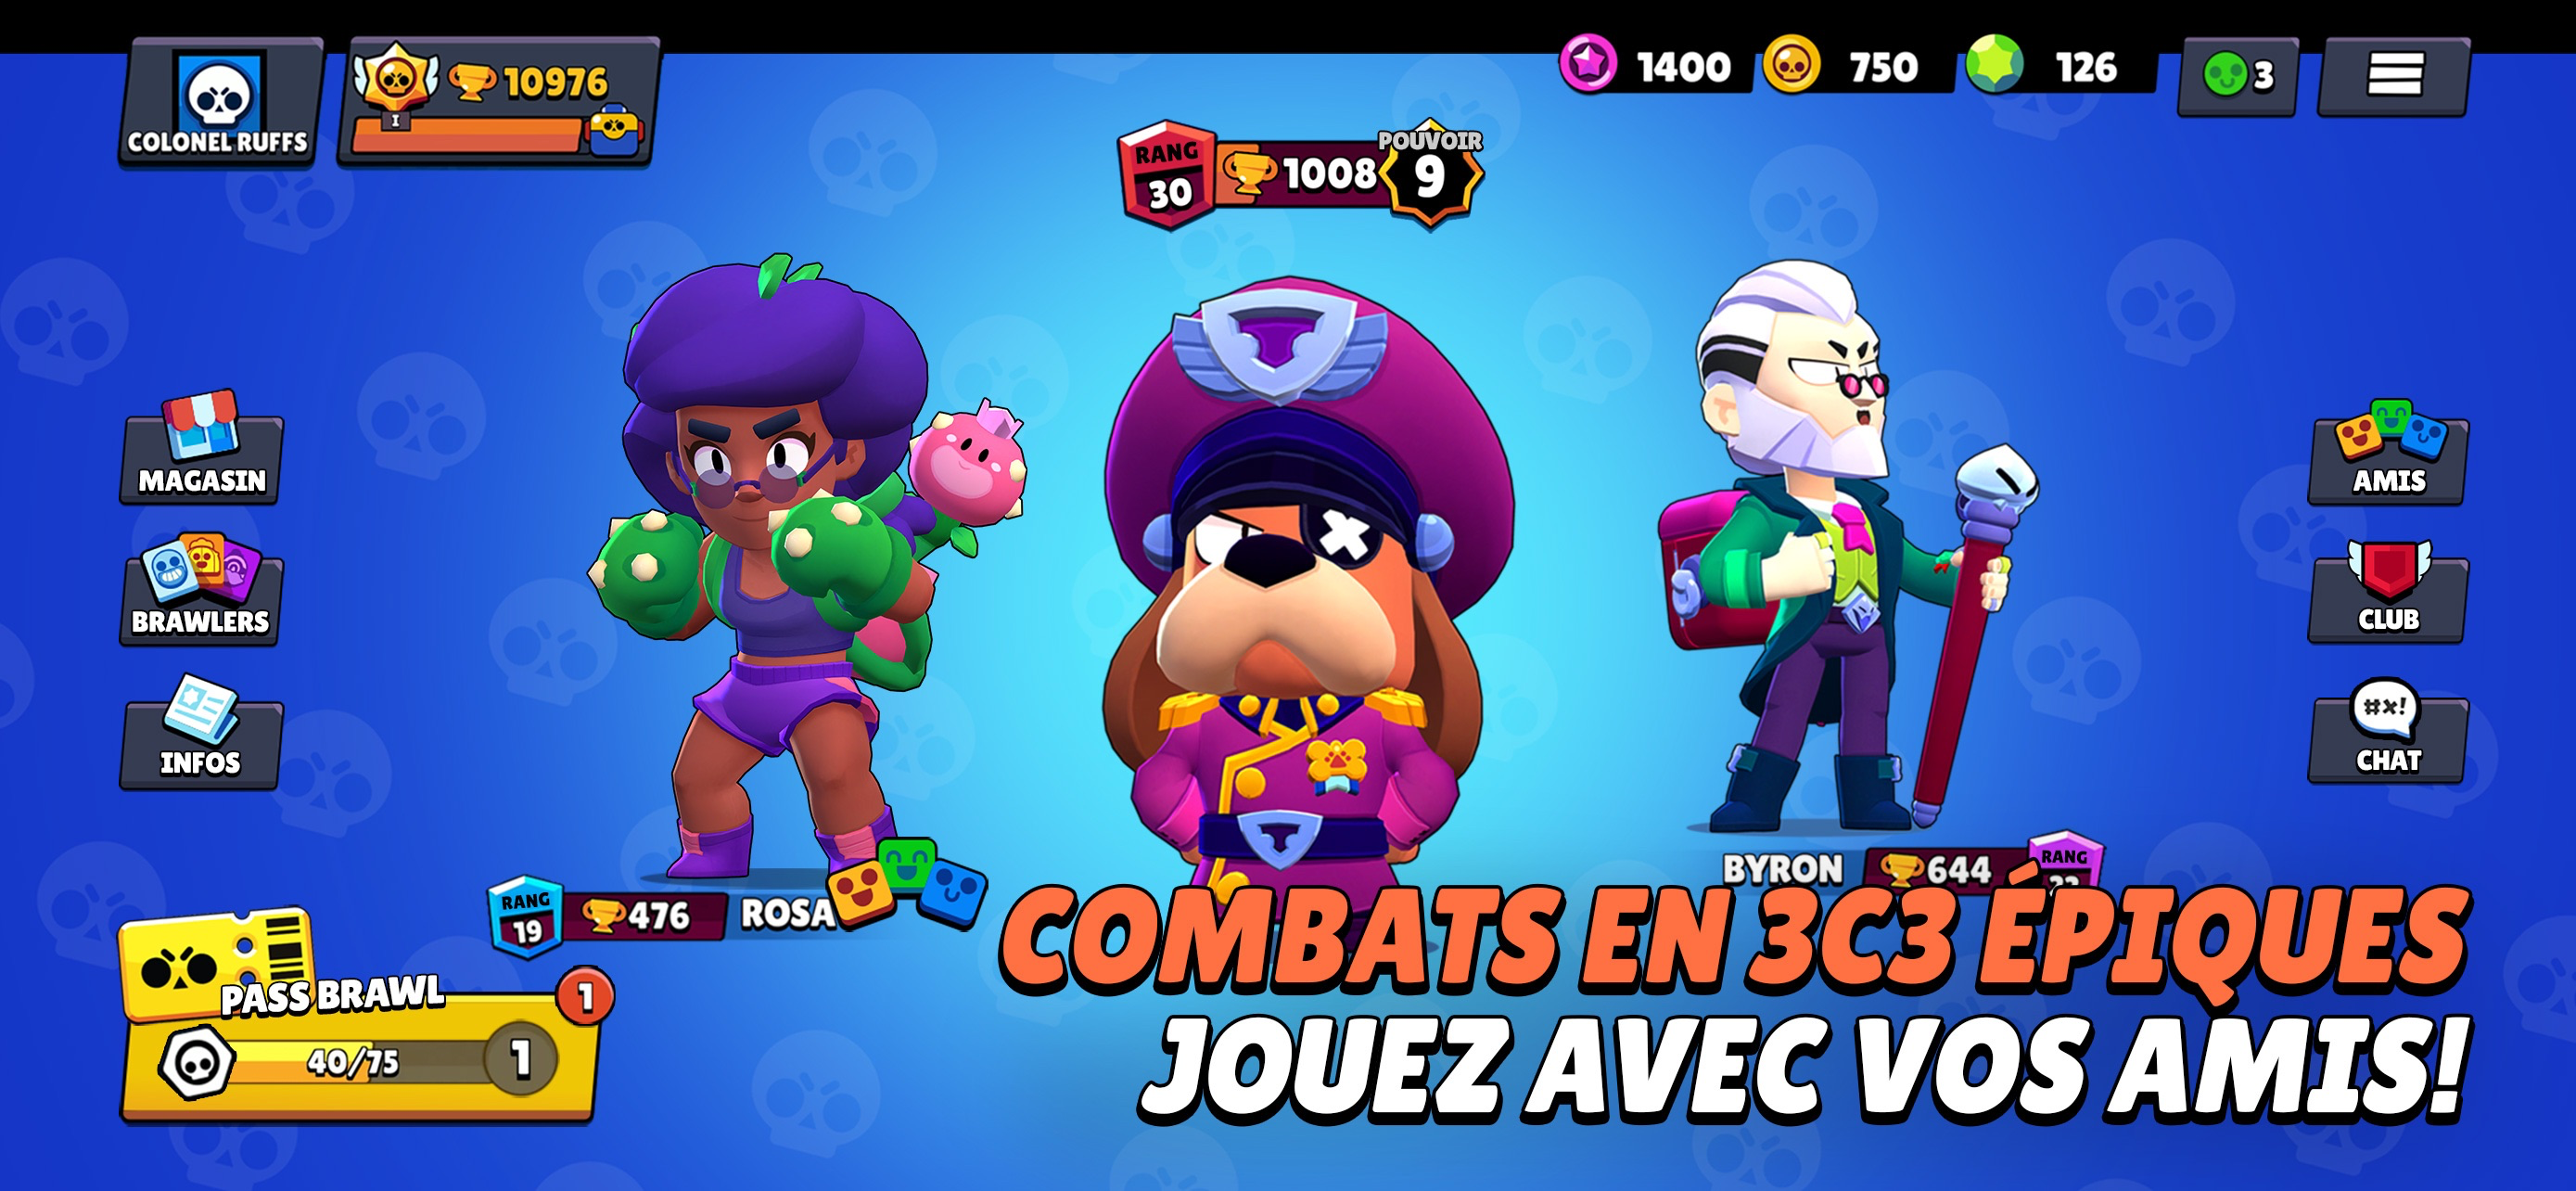 Brawl Stars Overview Apple App Store France - brawl star personnage gemme pour brawler